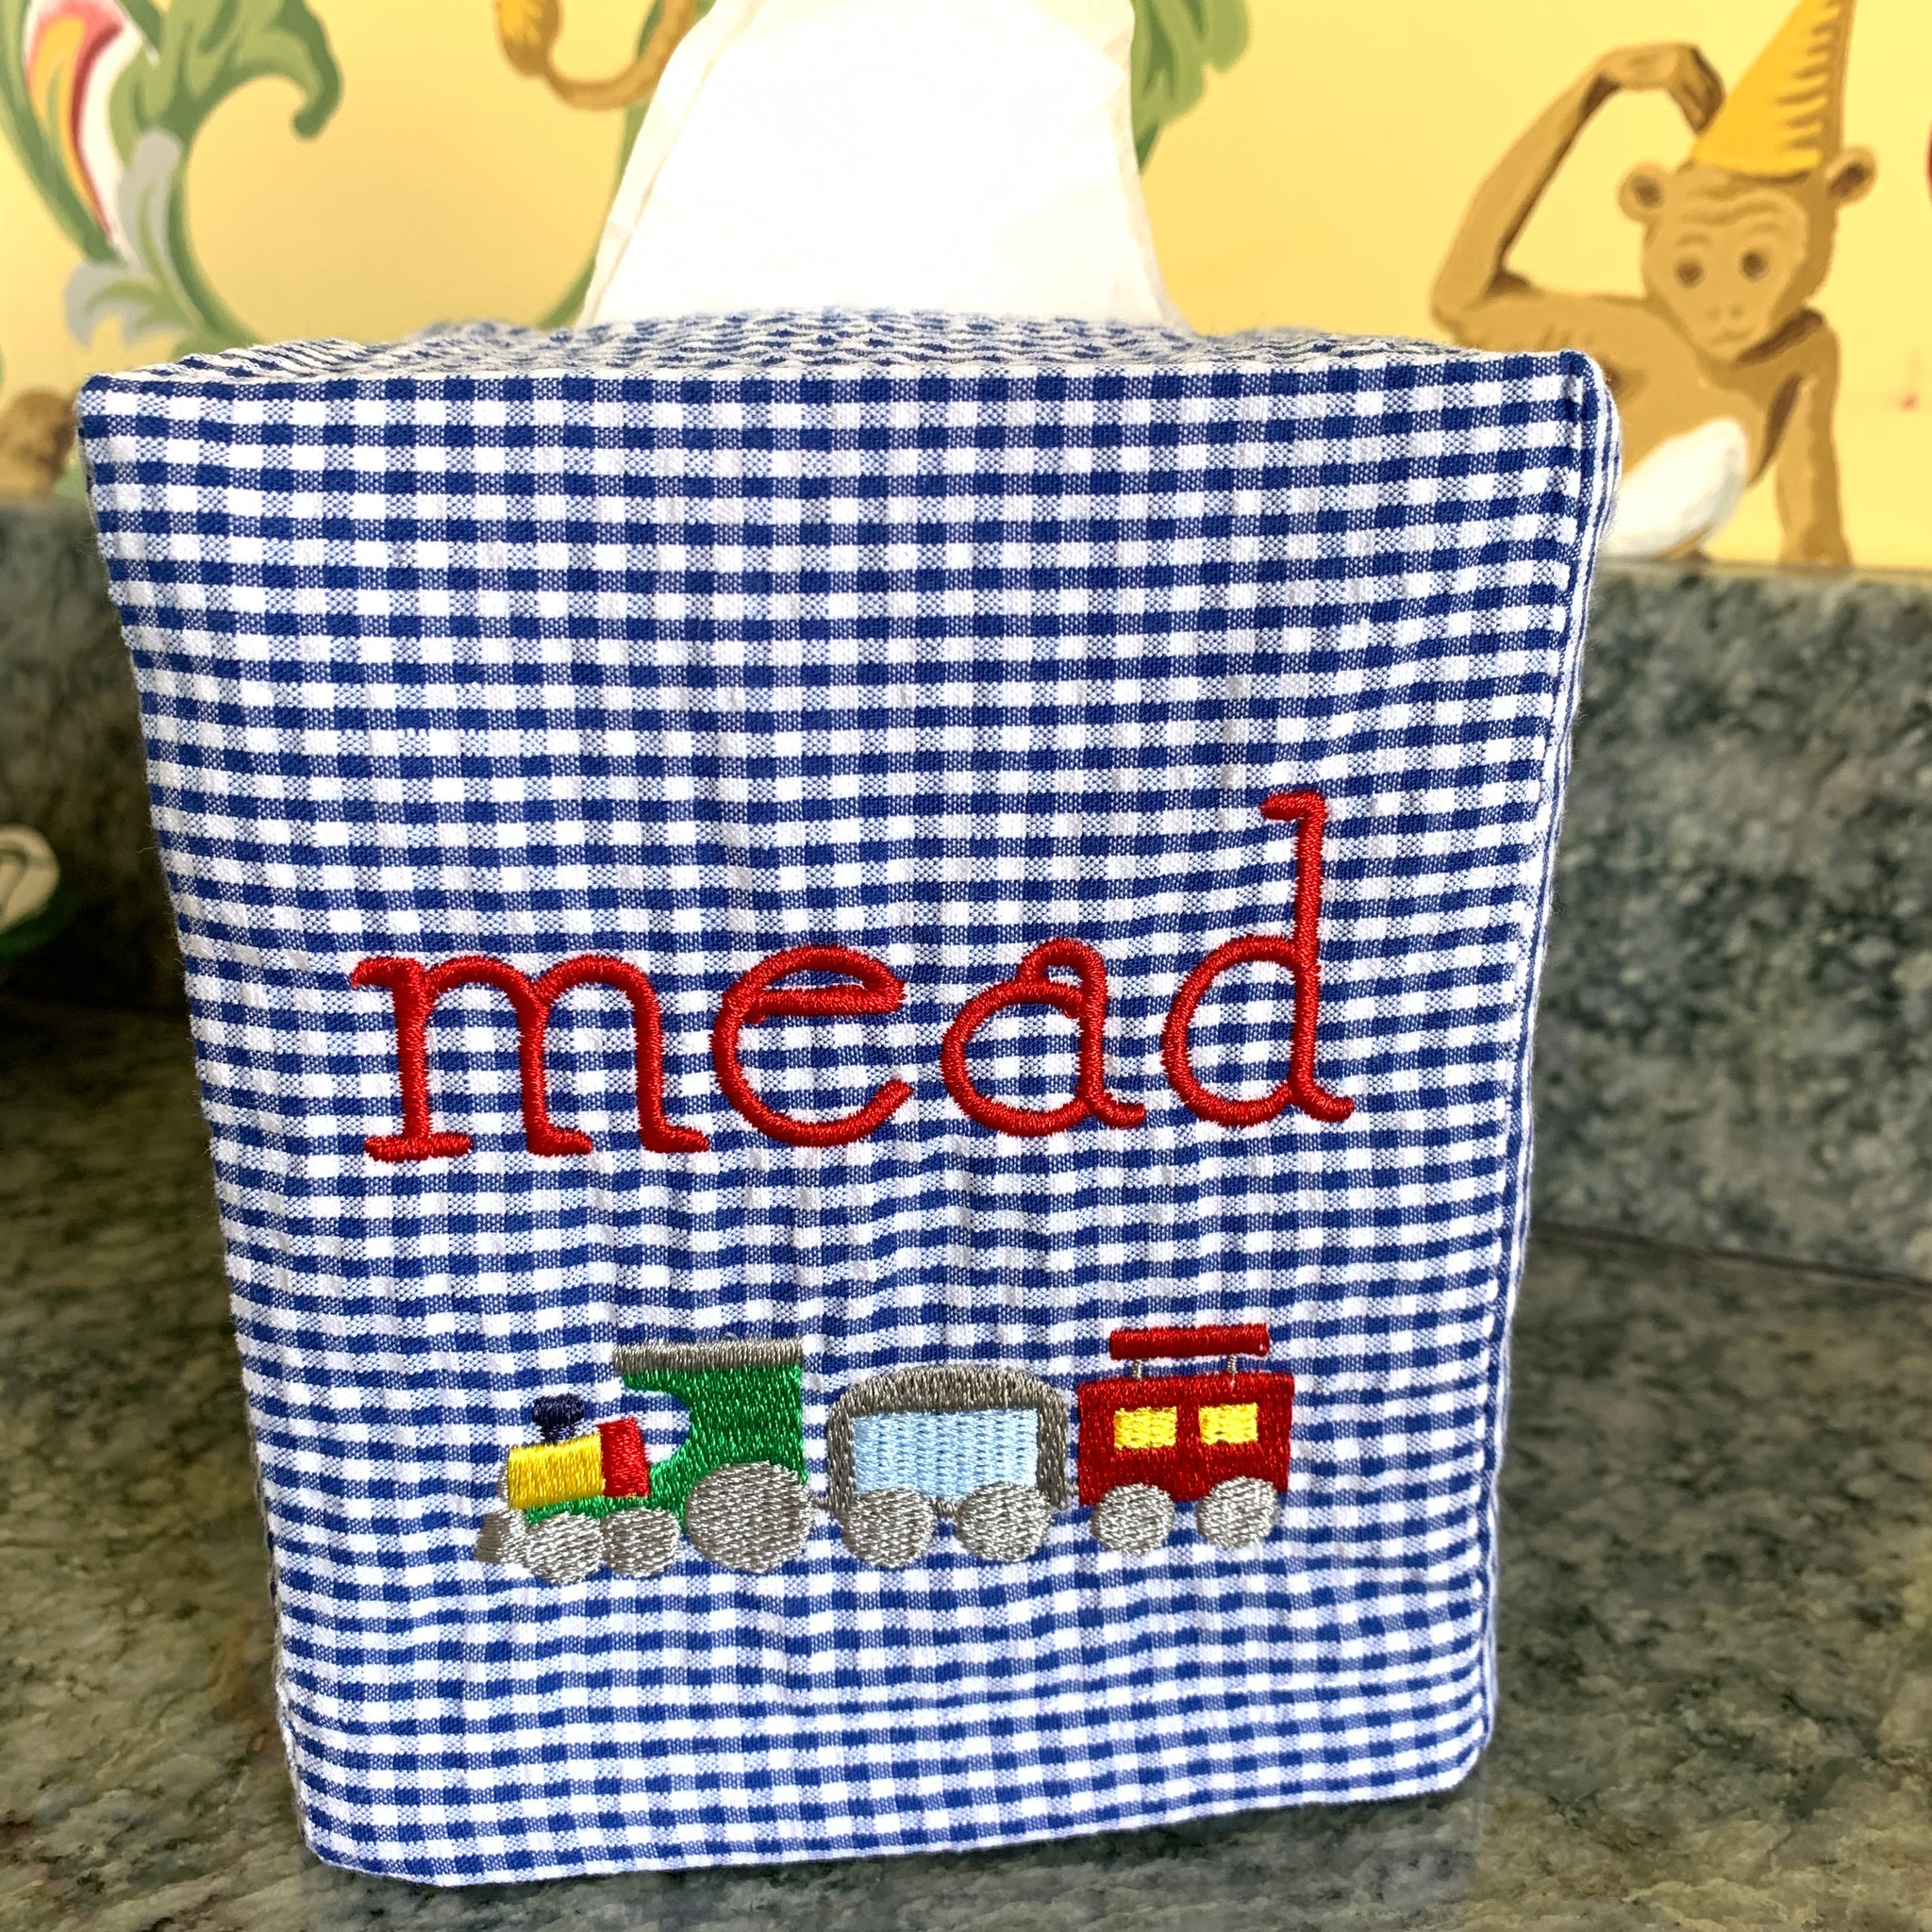 Gingham Seersucker Tissue Box Cover (Two colors)